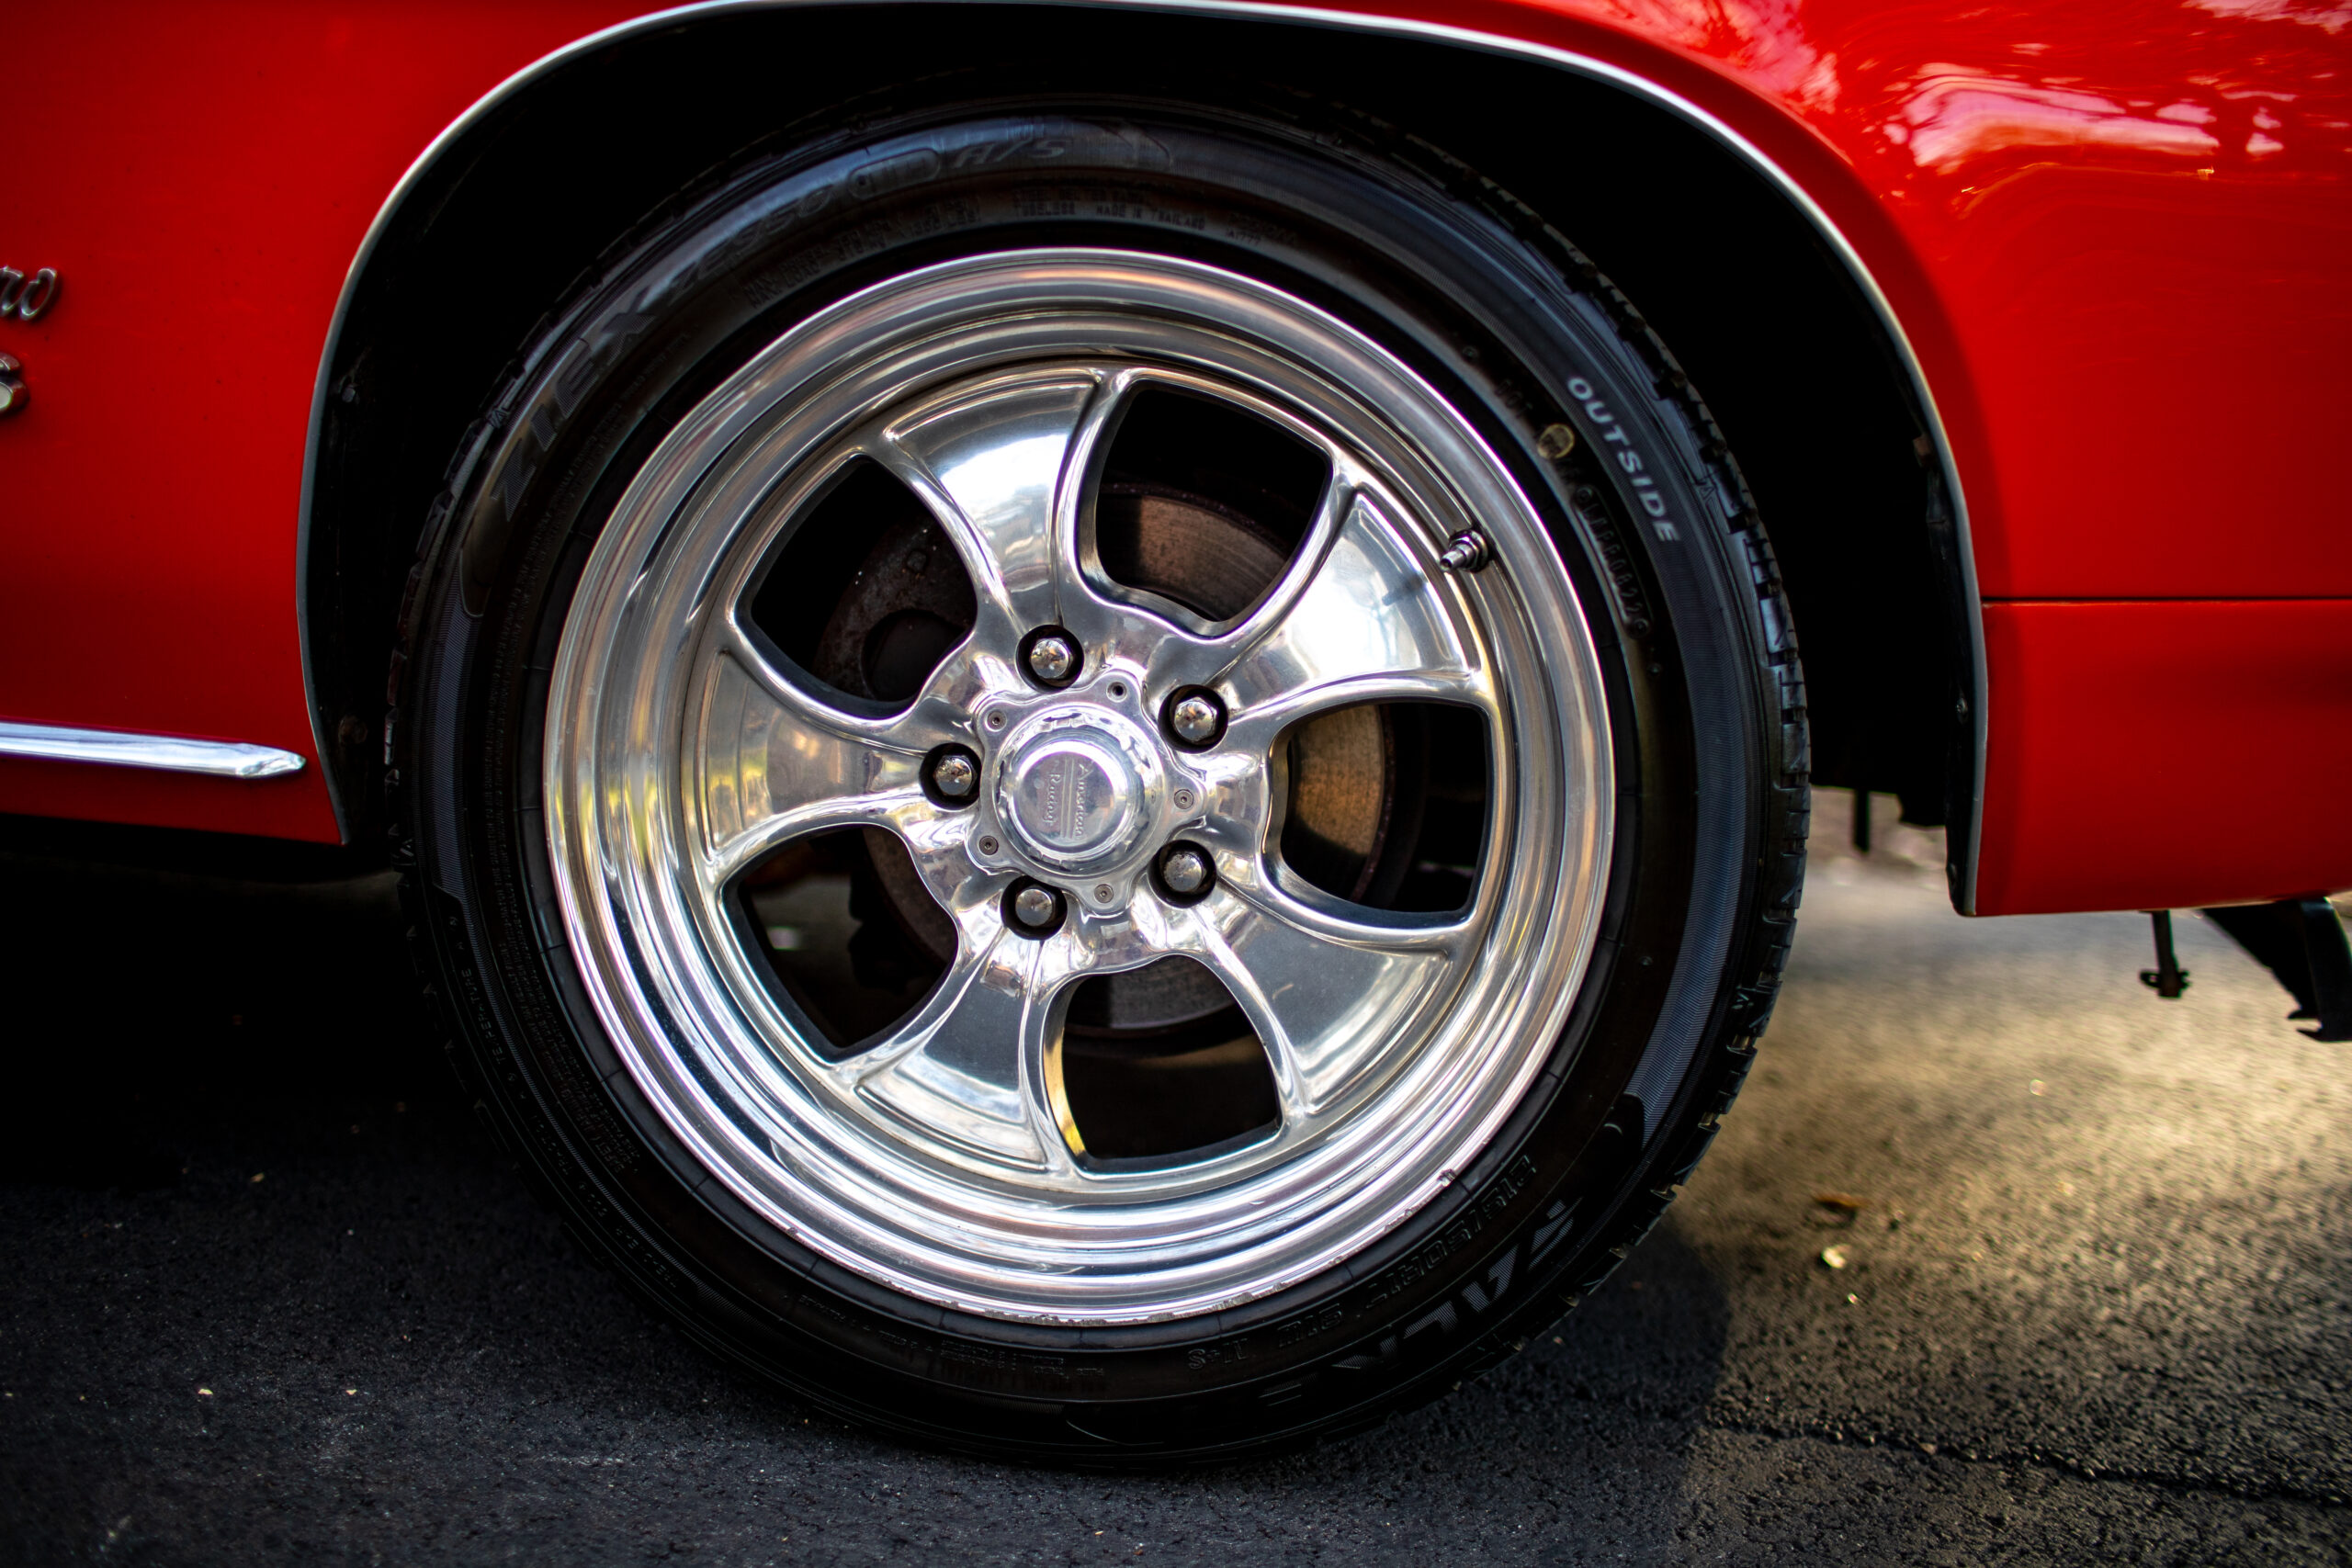 Close-up of a shiny chrome alloy wheel on a red car, mounted on a black tire. The car's exterior paint is visible in the background.